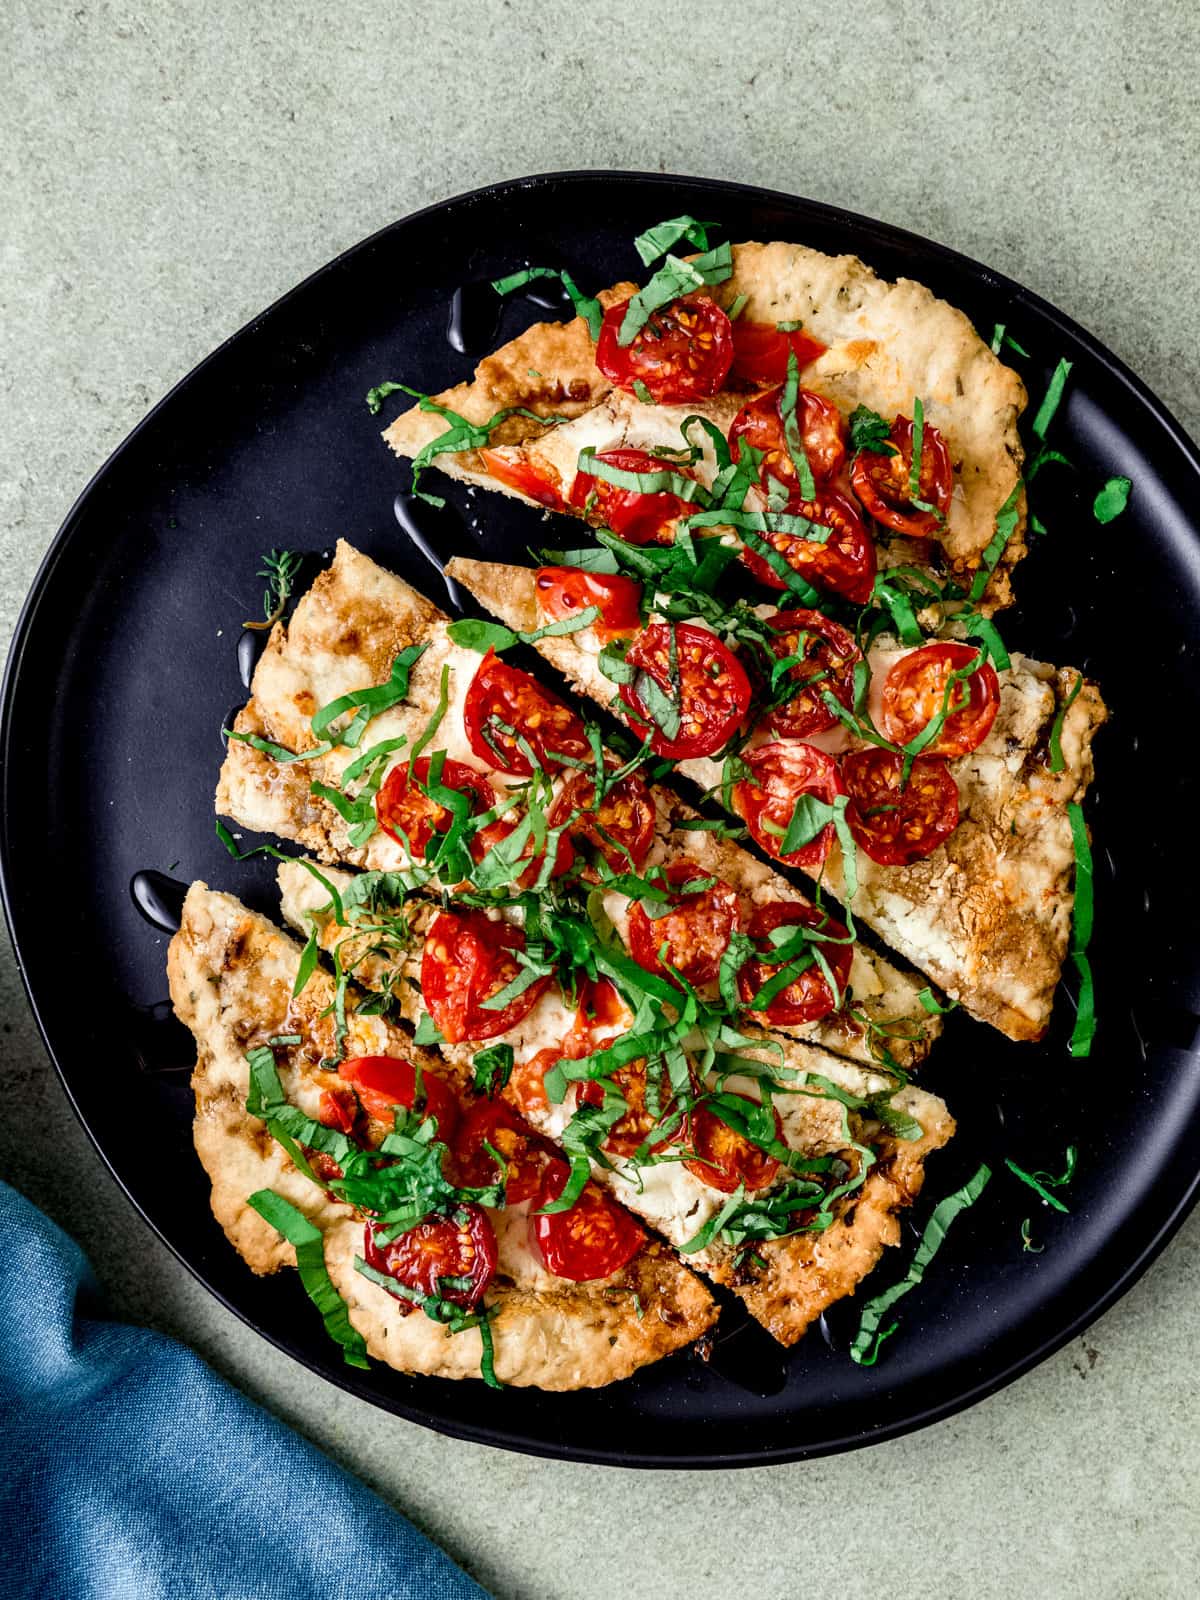 Bake the cheese and tomato flatbread until crisp and garnish with balsamic glaze and fresh herbs.